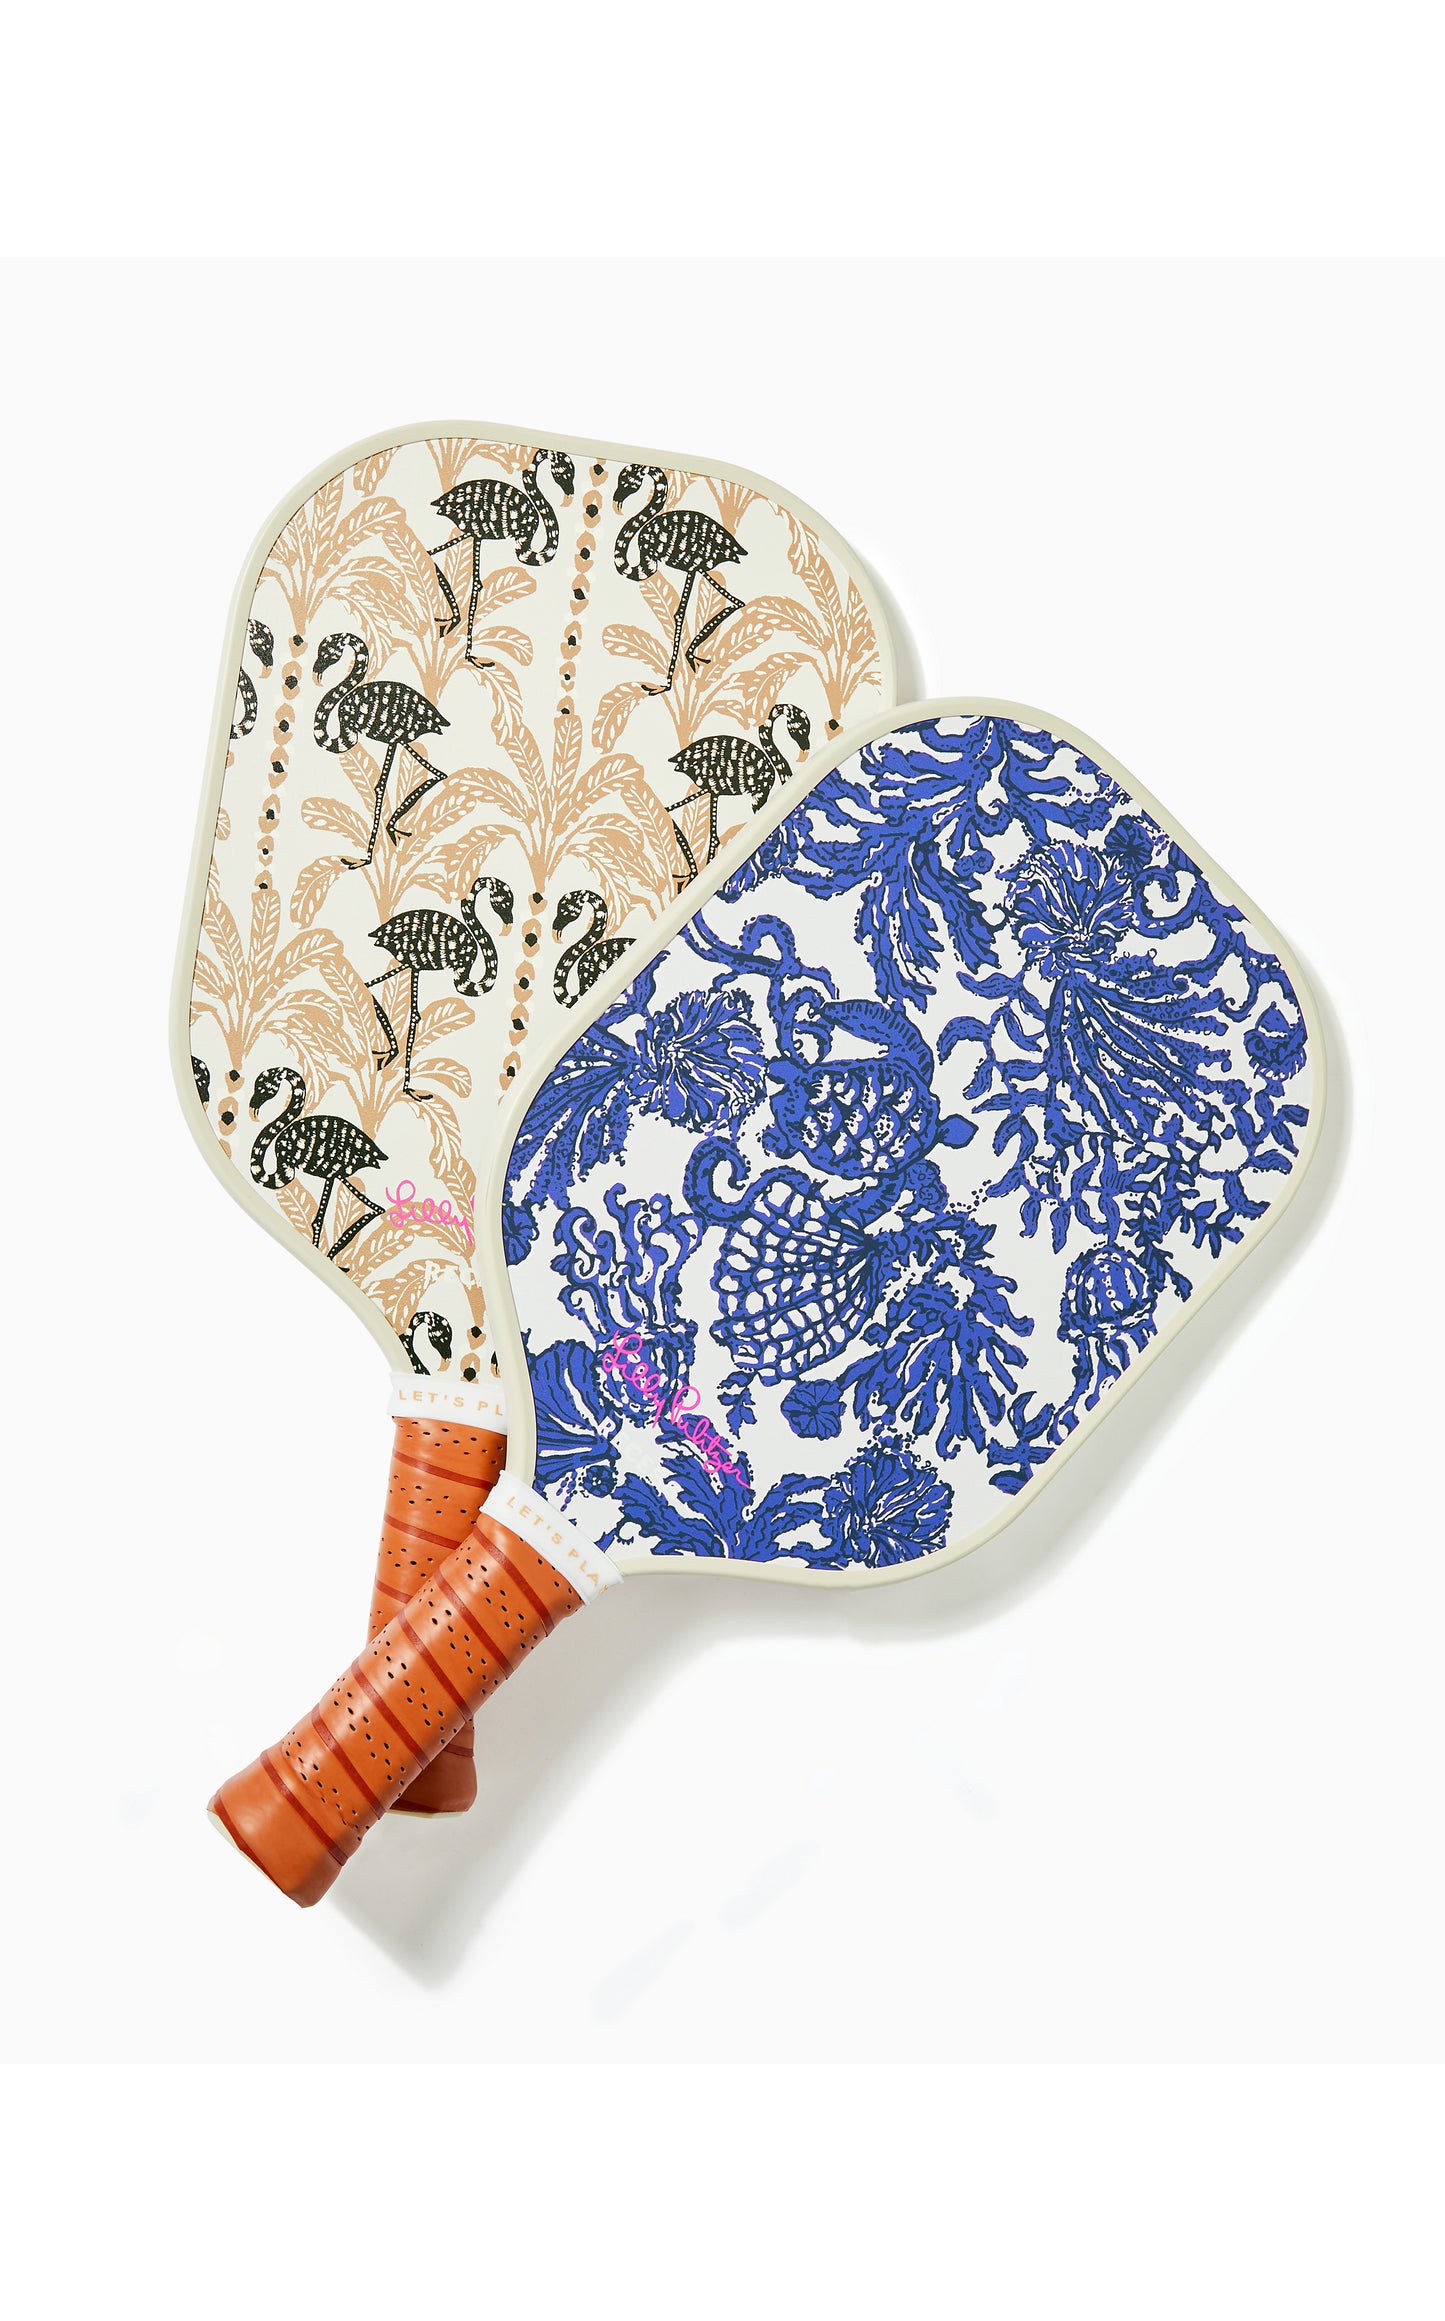 Lilly Pulitzer x Recess Pickleball Paddle